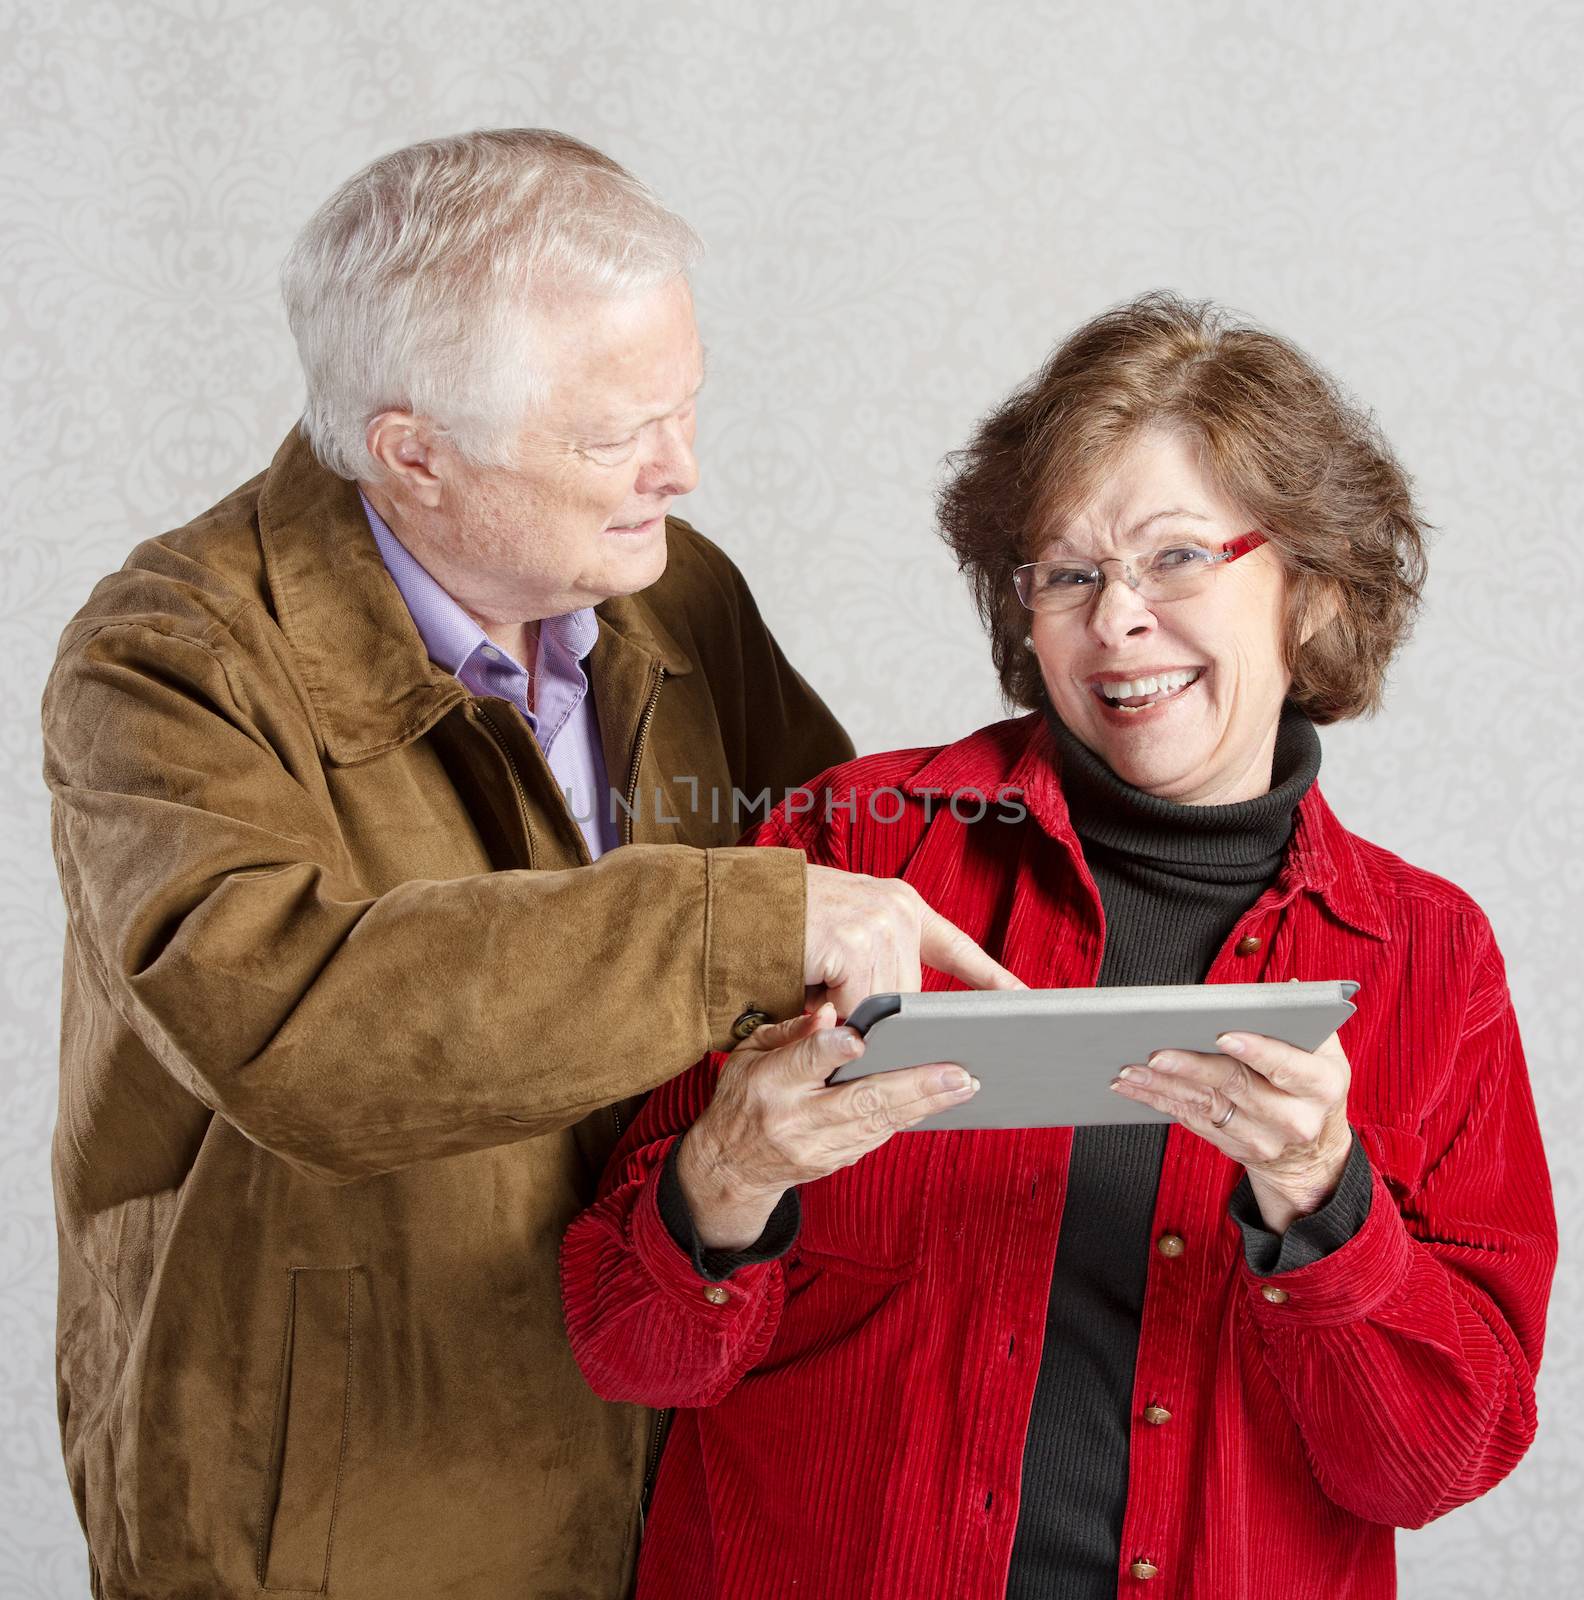 Man Looking at Woman's Tablet by Creatista